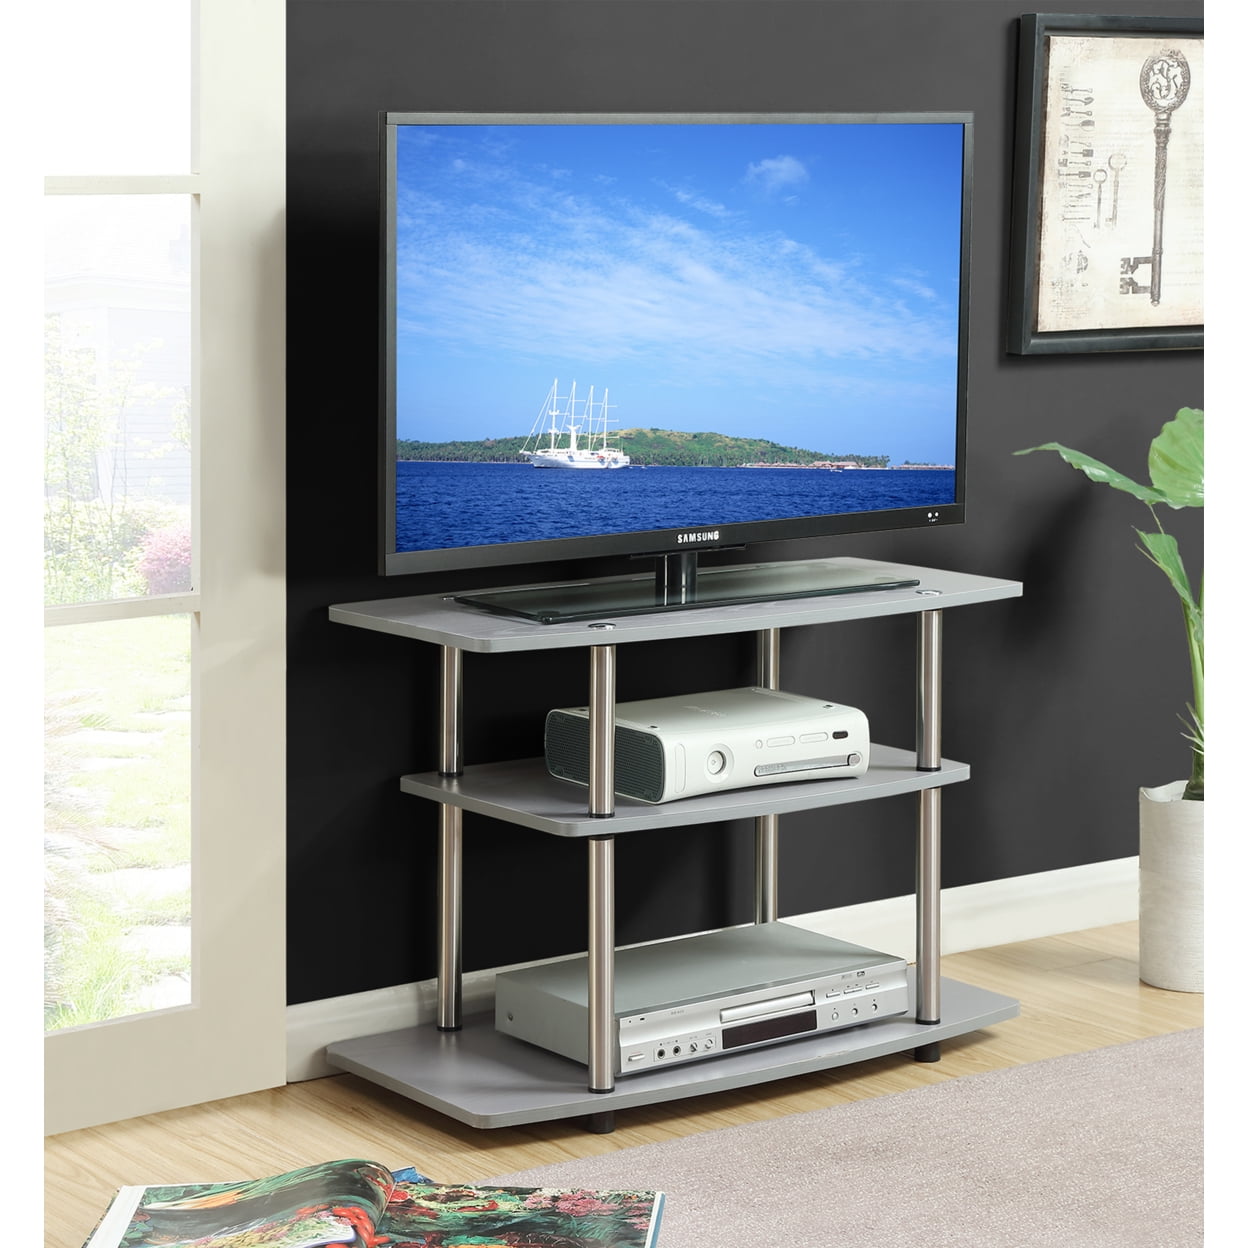 131020gy 3 Tier Tv Stand, Gray - 31.5 X 15.75 X 22.25 In.